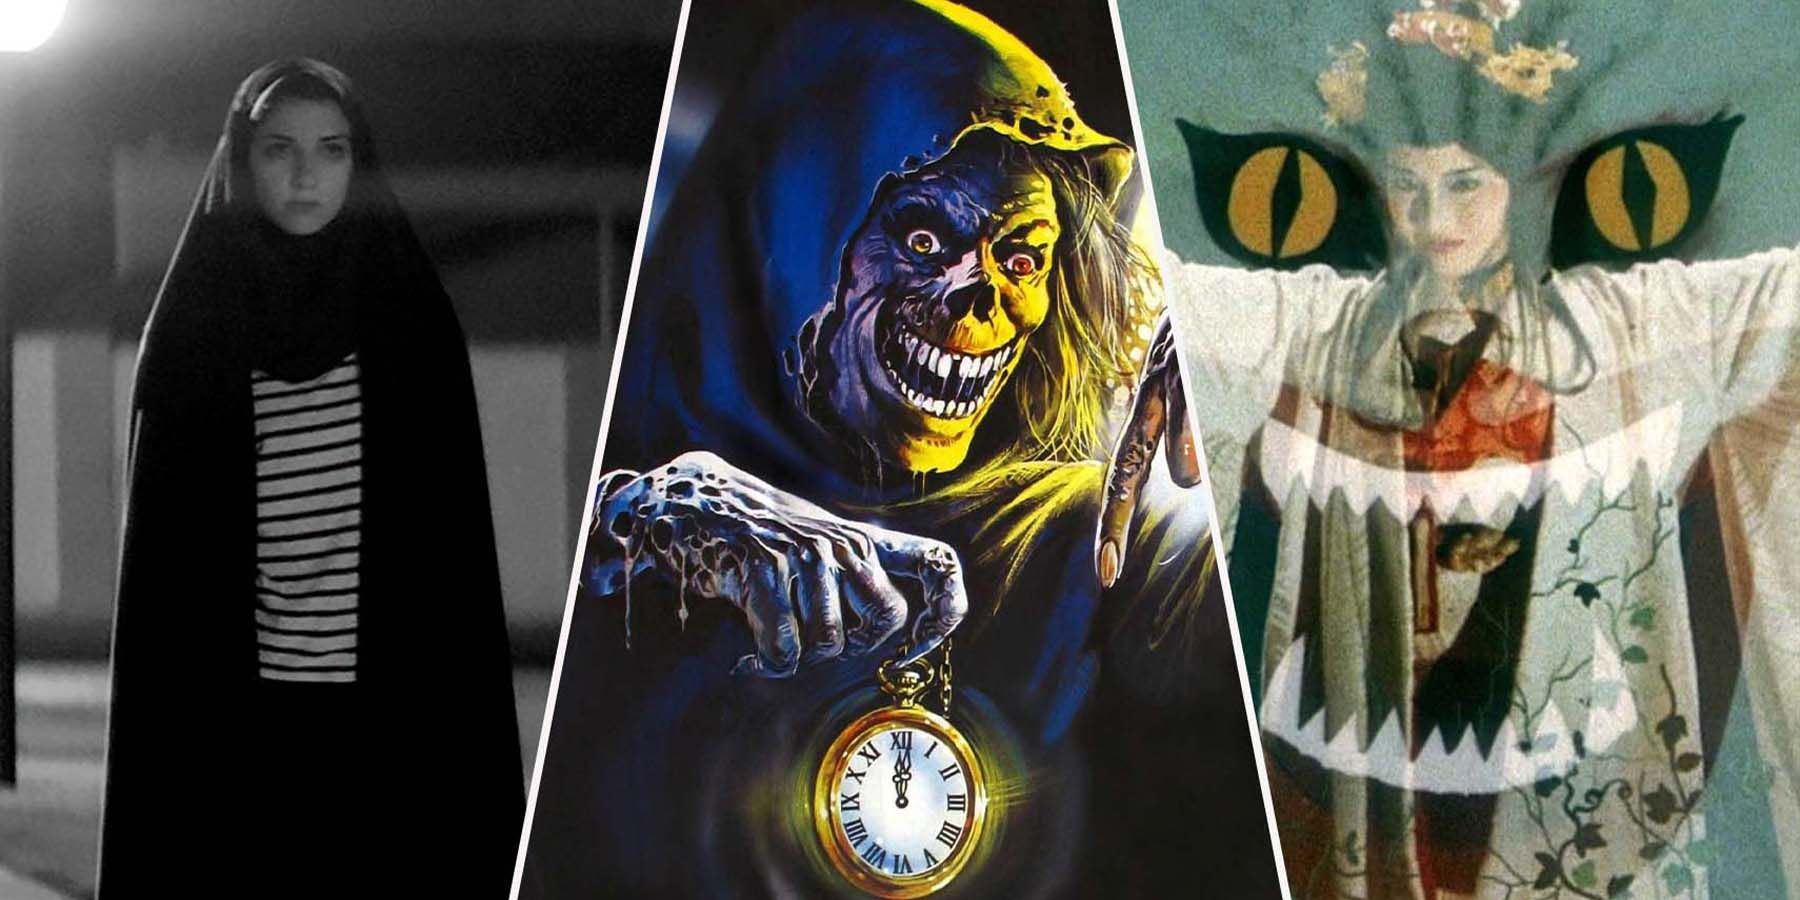 10 Of The Best Horror Movies That Don't Use Jumpscares featured image